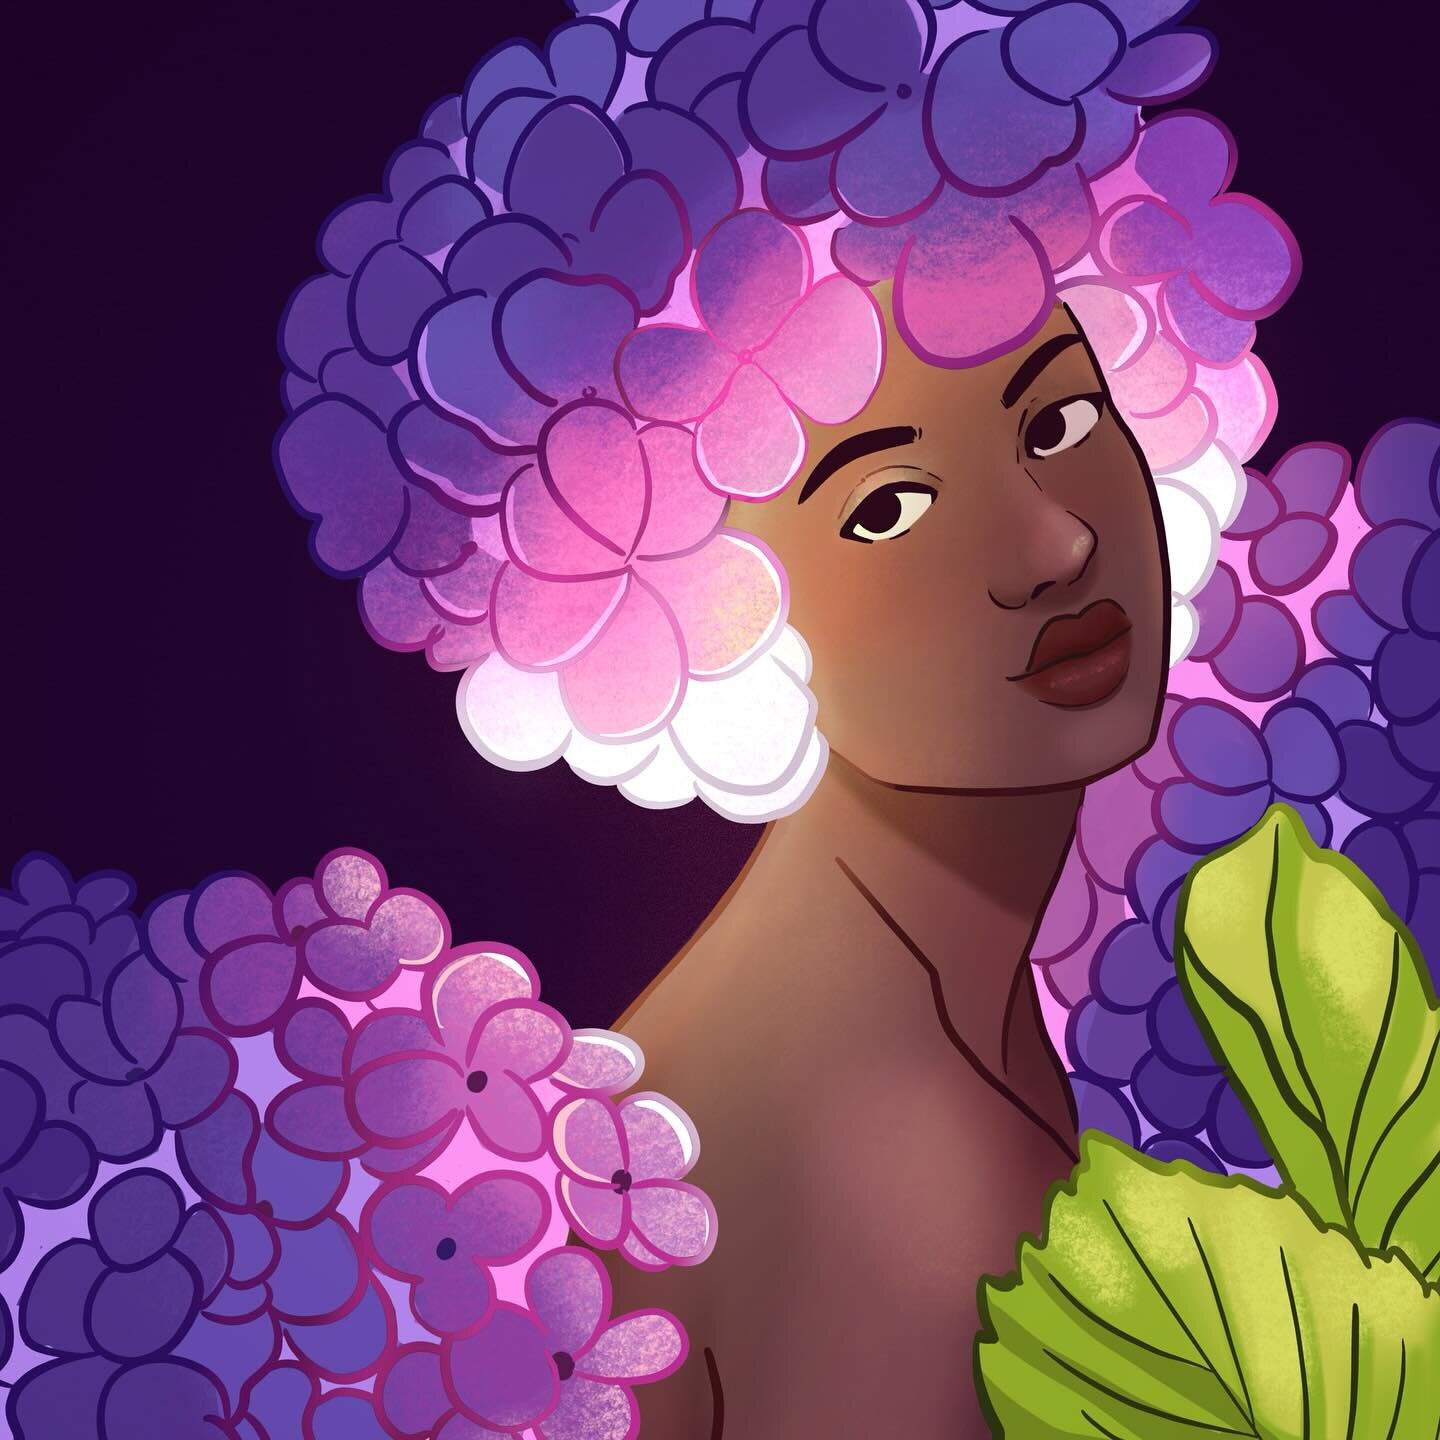 I&rsquo;m still working on #huevember slowly but surely I love purple hydrangeas and had the idea of using it as a hair ! What is your favorite flower? 🌸 🌺 

#huevember2023 #purplehydrangea #hydrangea #procreateart #procreate #digitalart #digitalar